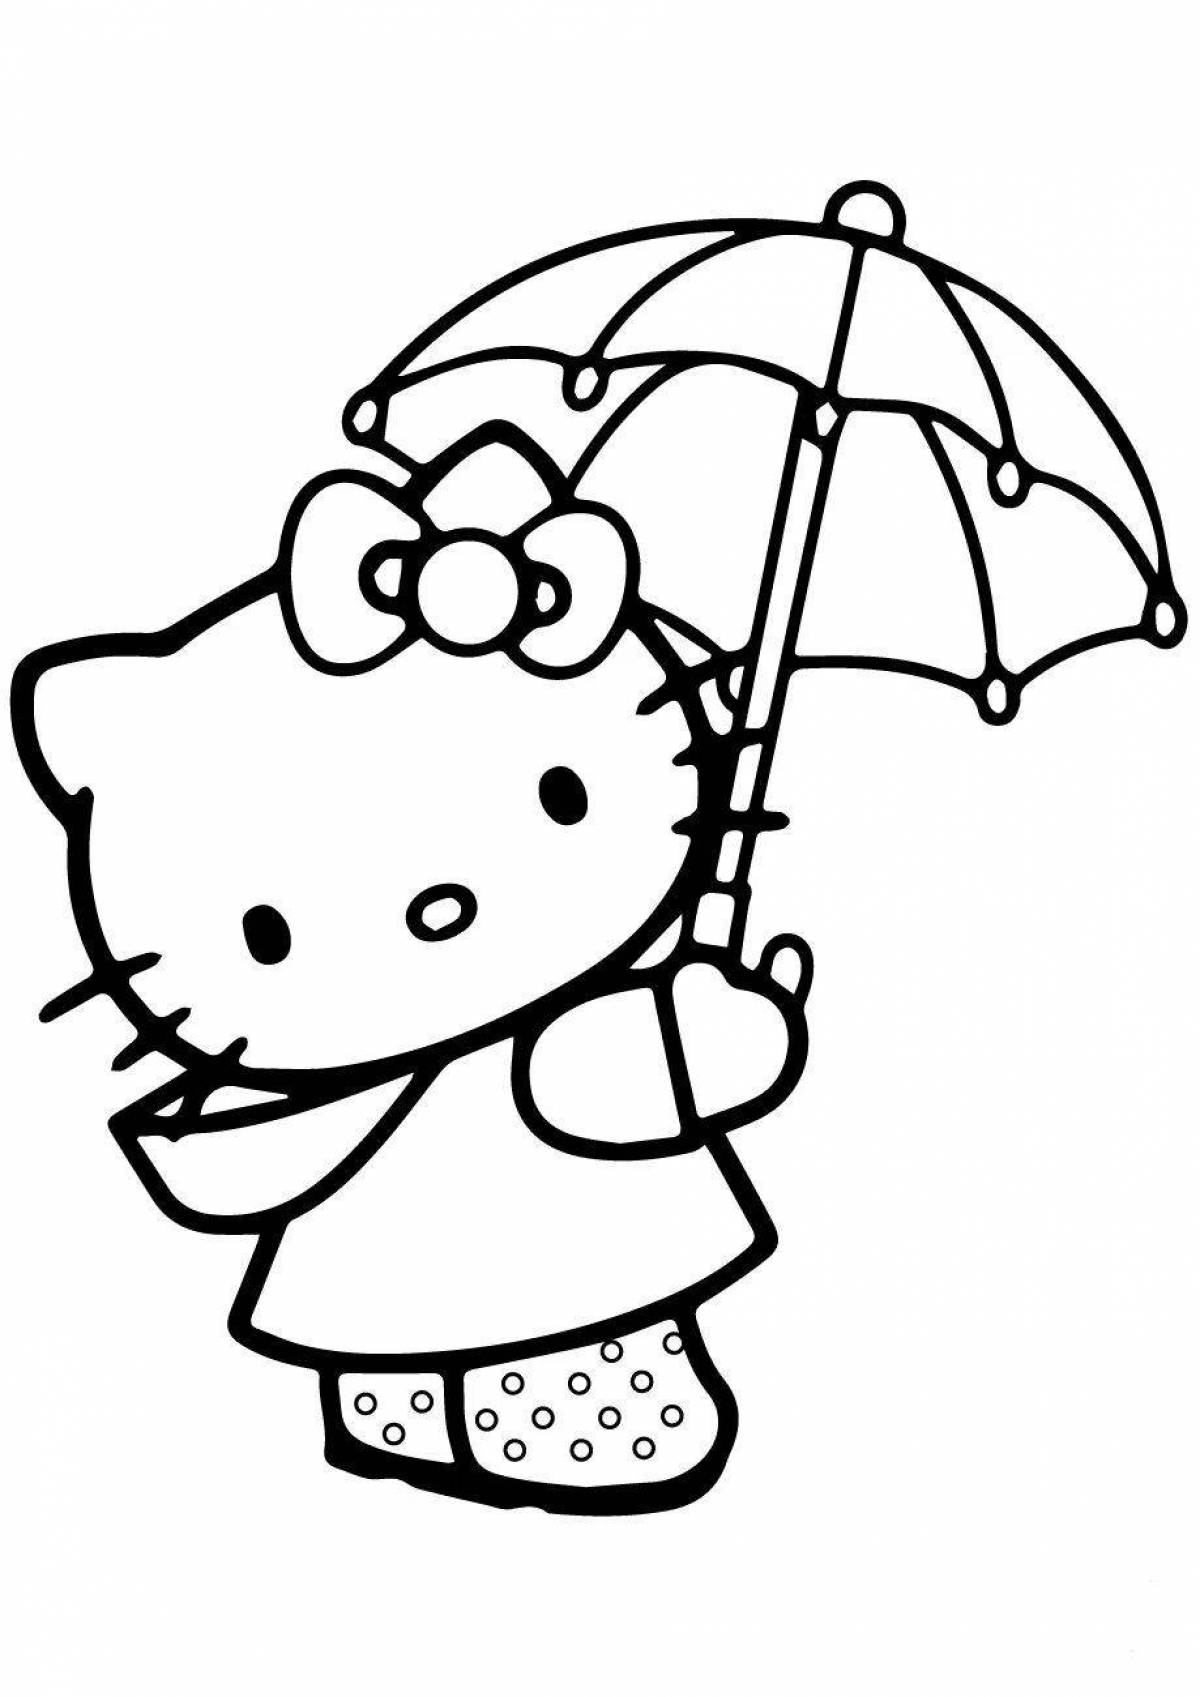 Cute kitty coloring book for kids